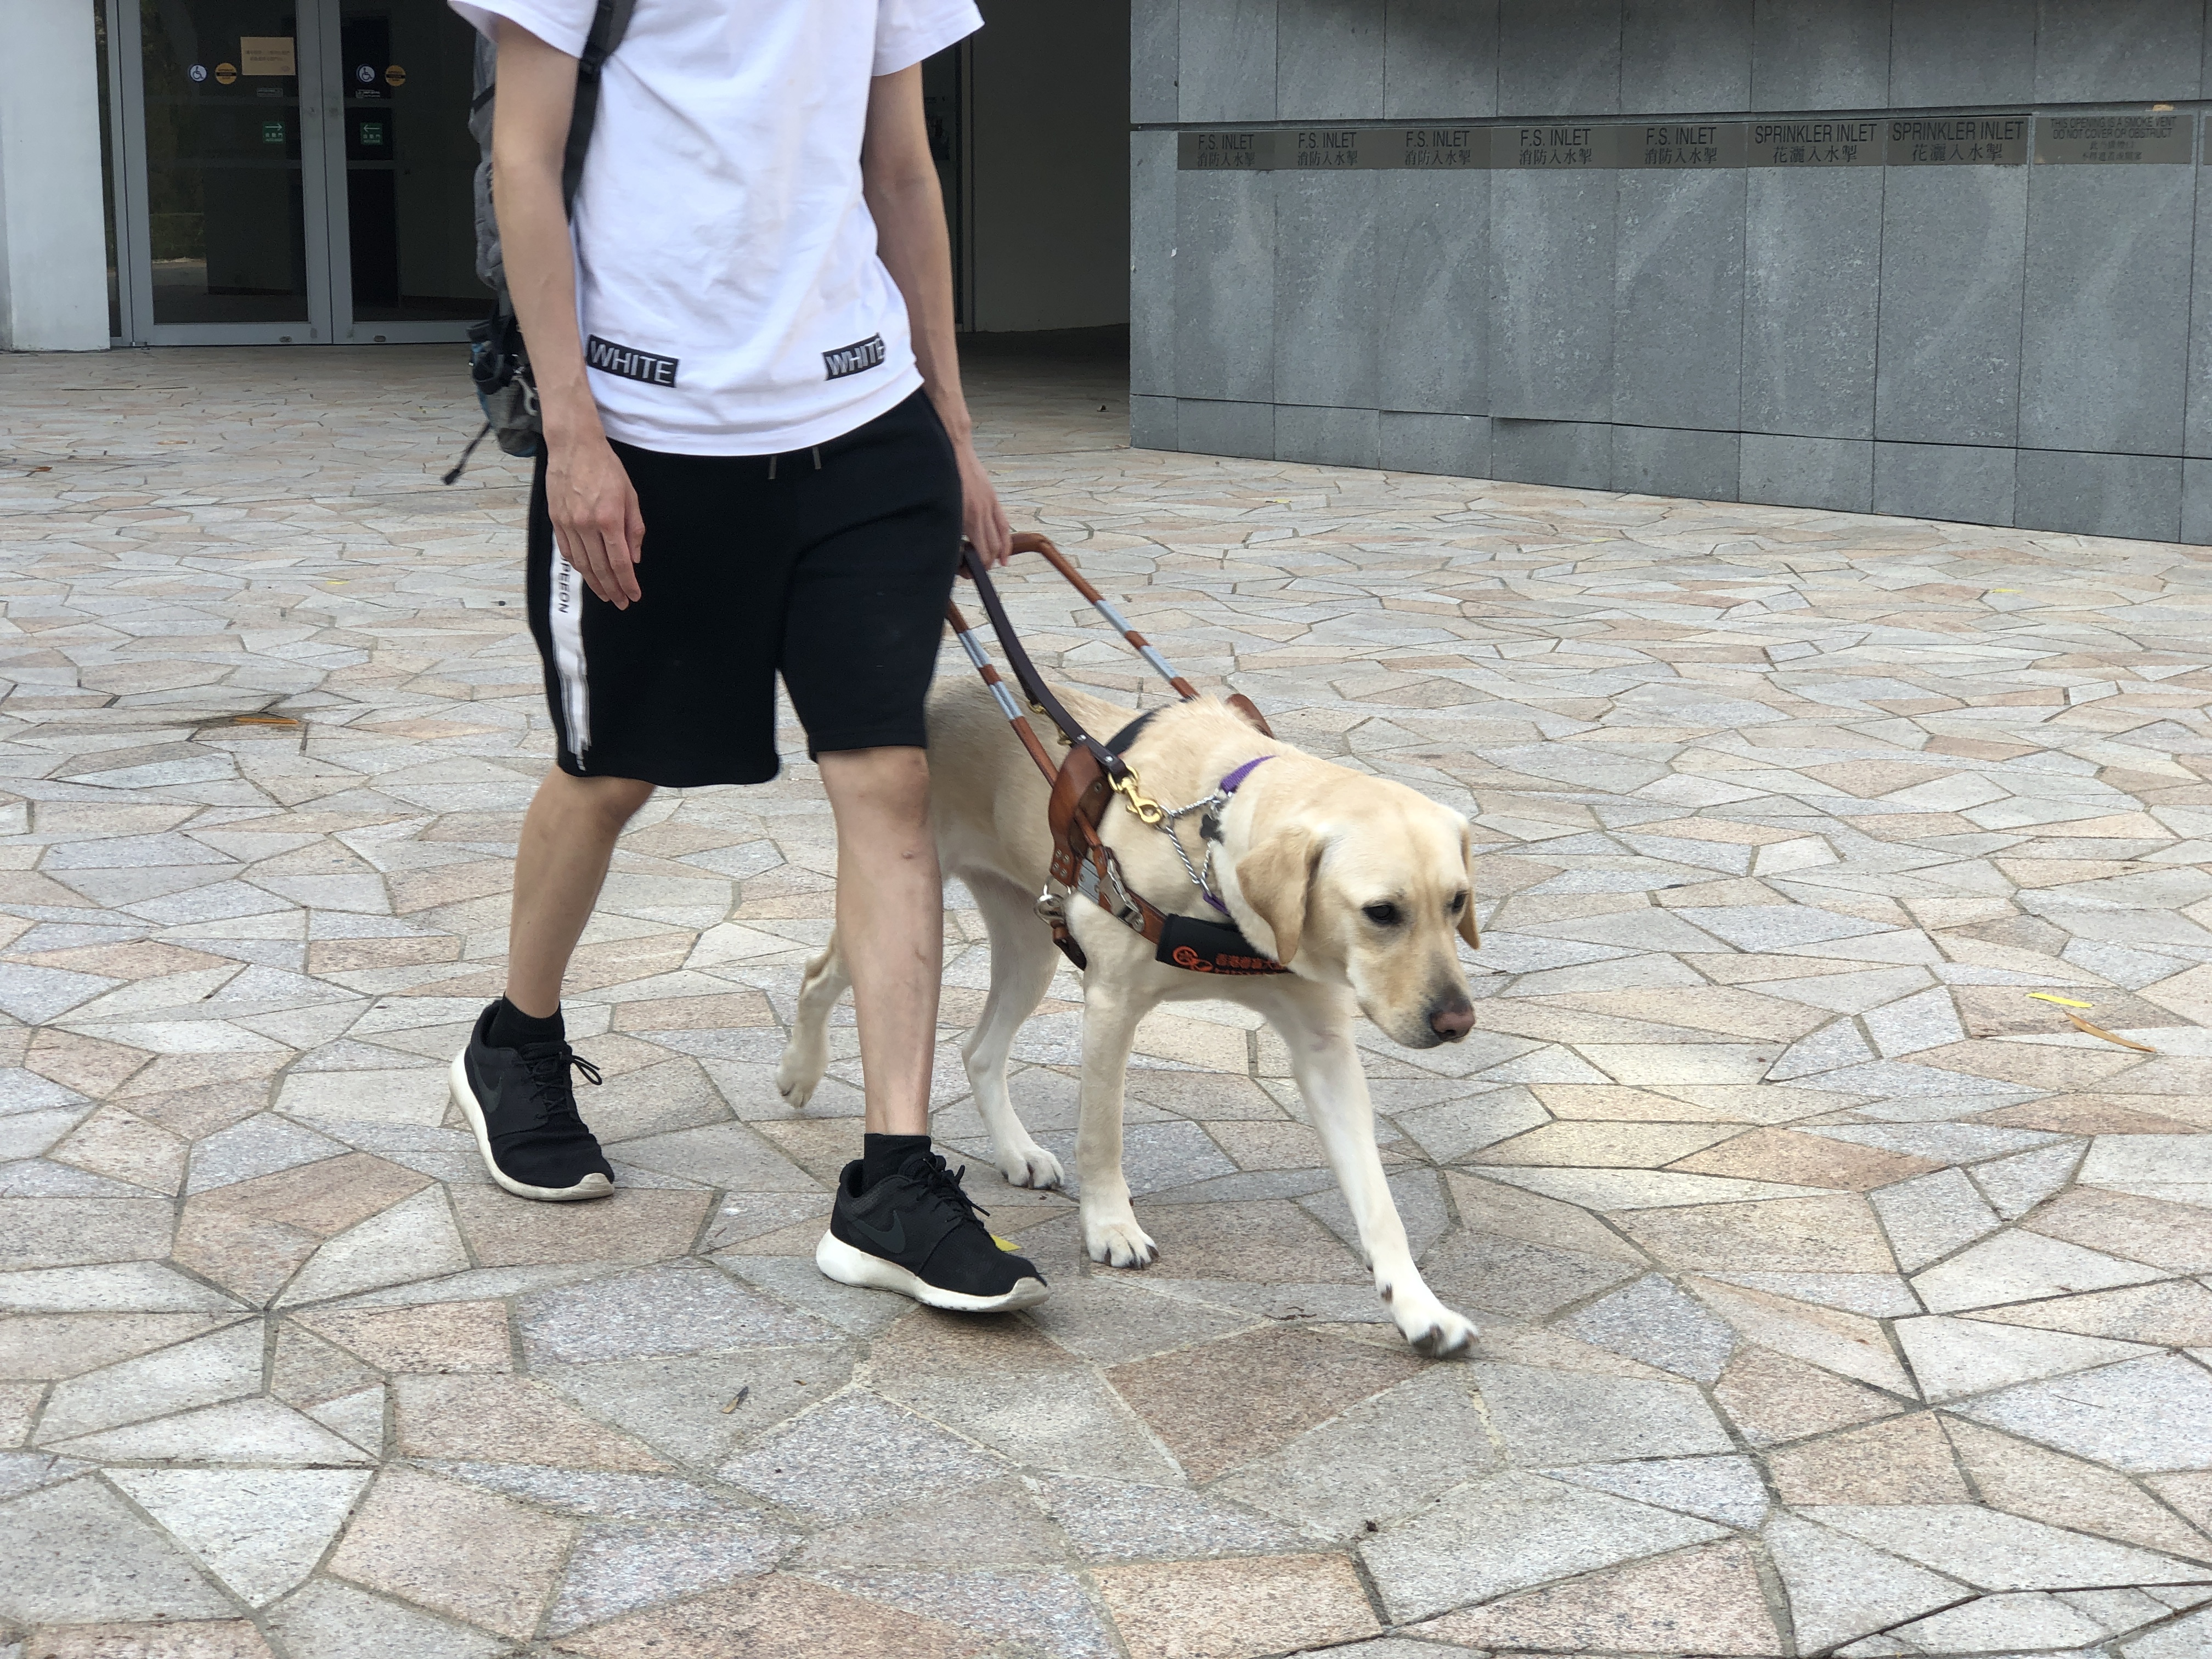 A guide dog walking with student with visual impairment